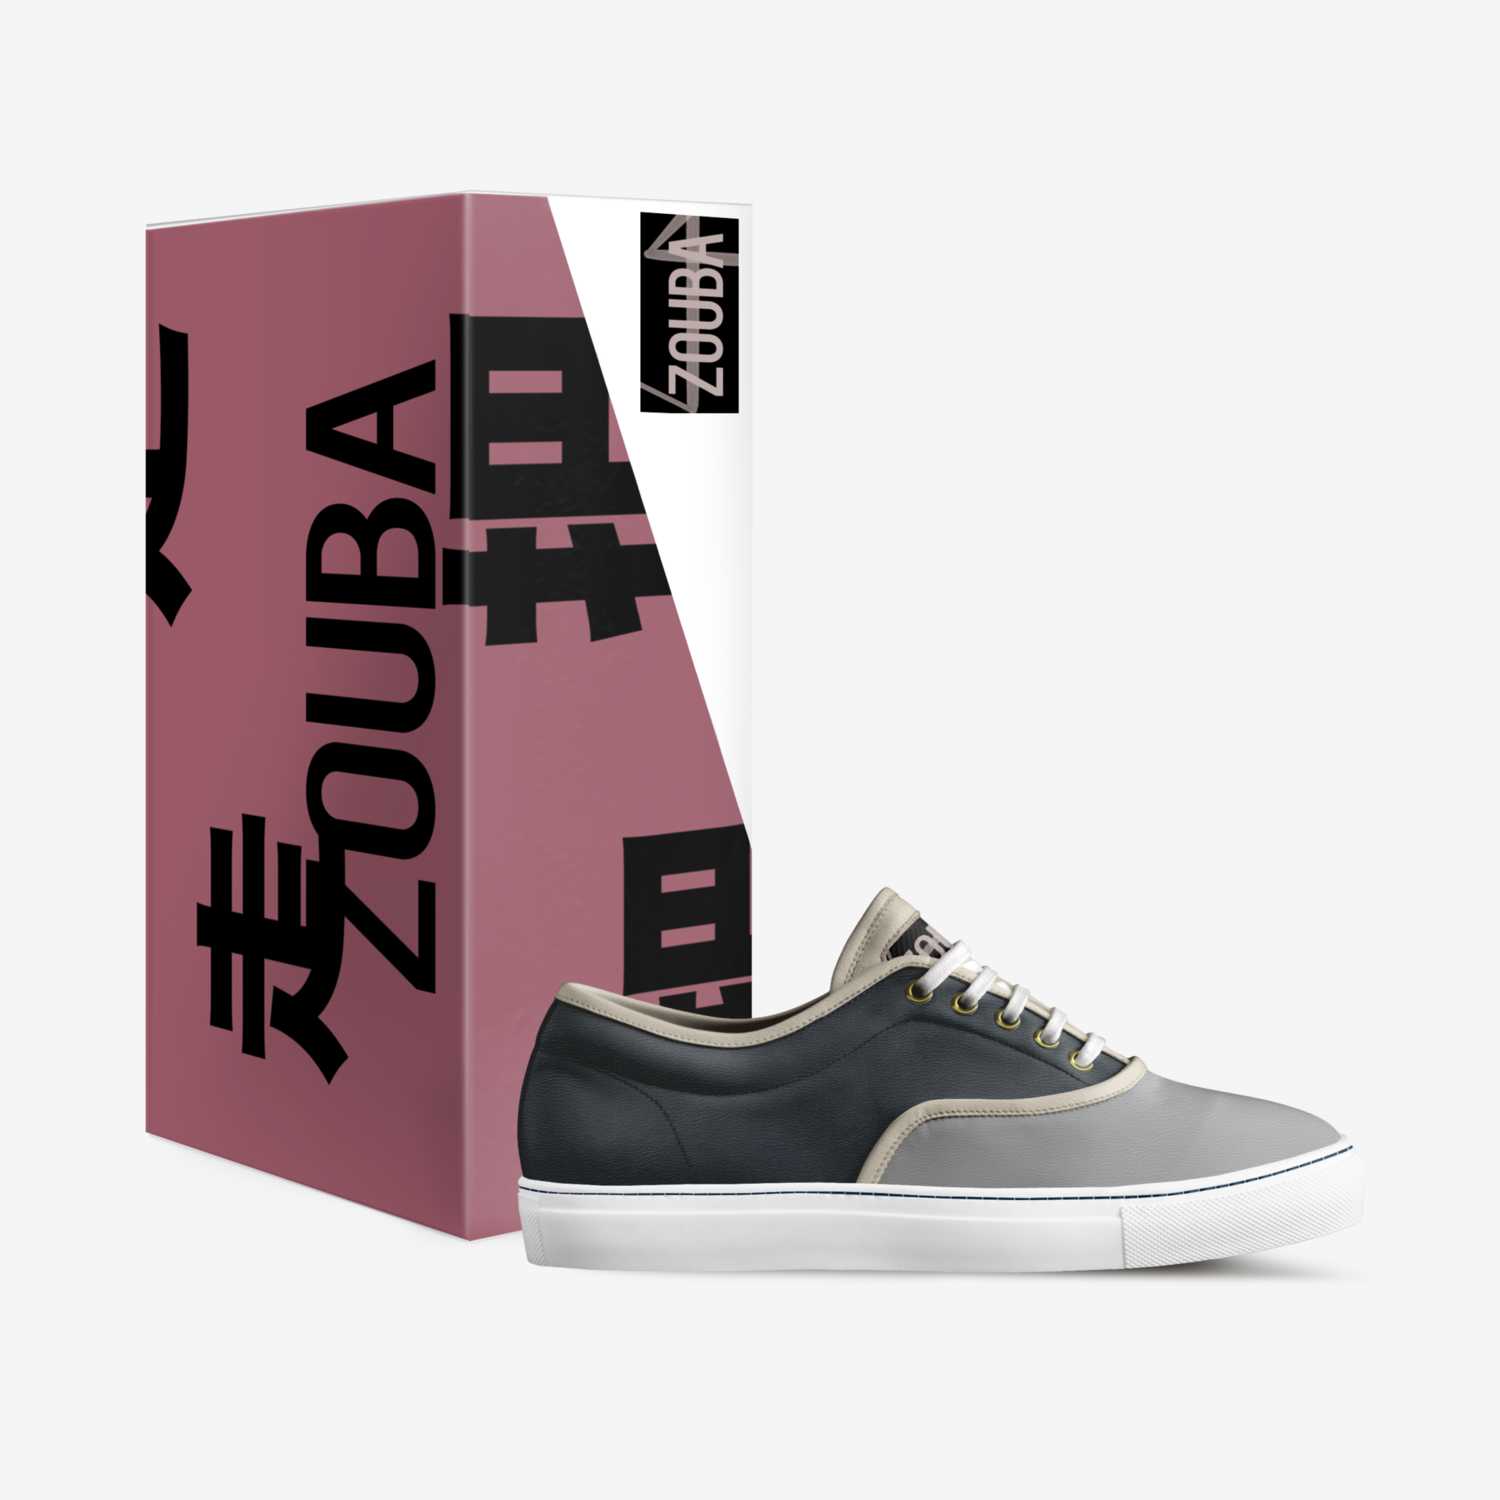 Zouba Shoes custom made in Italy shoes by Anna Saraste | Box view